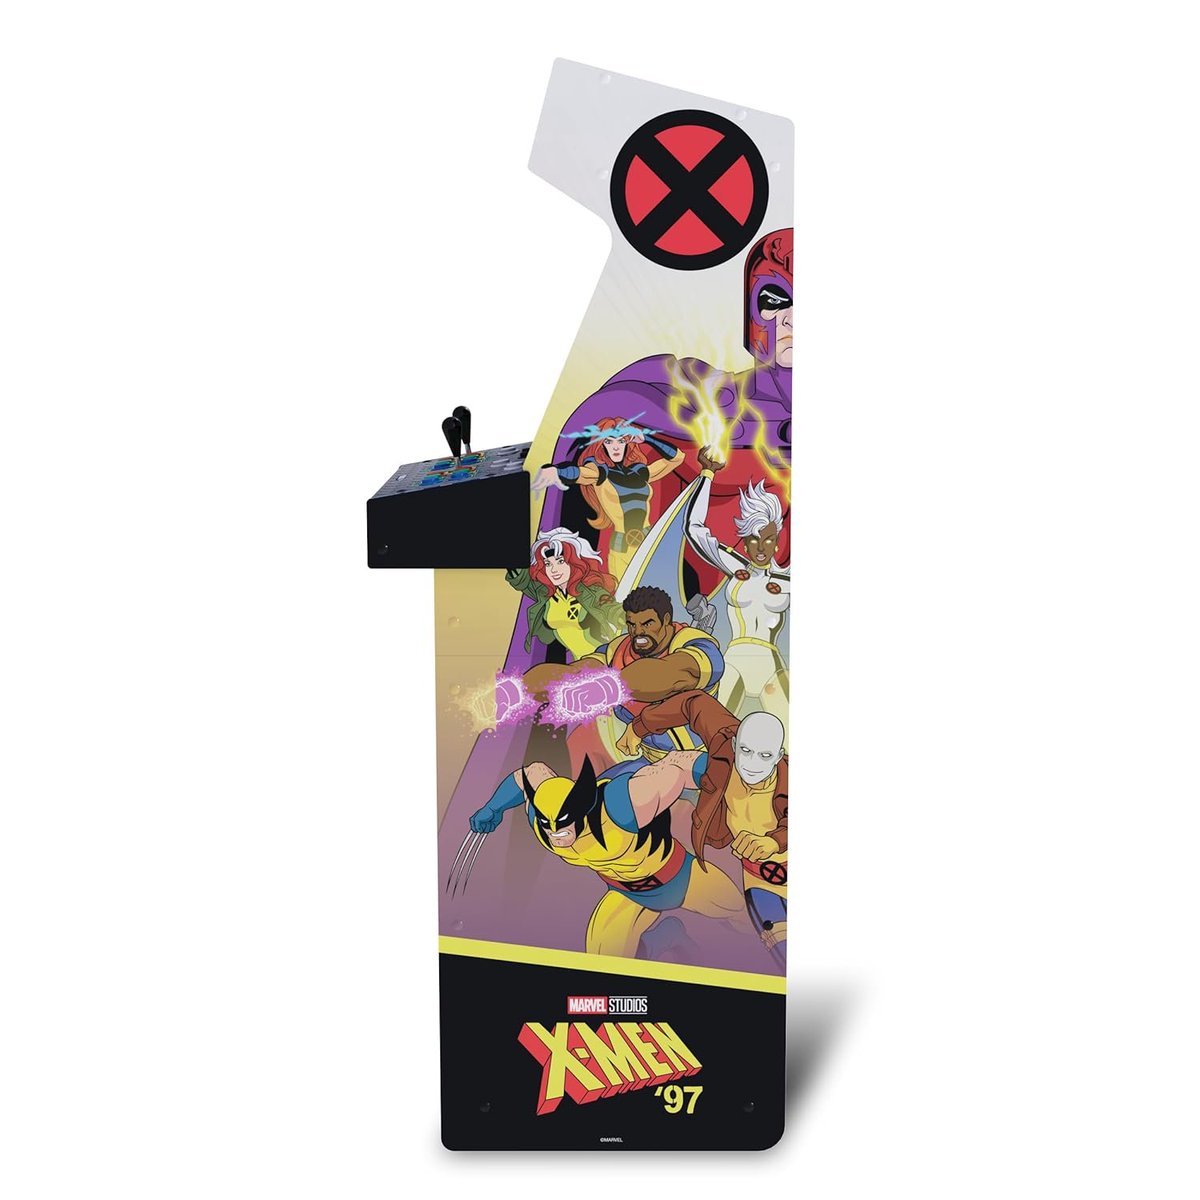 Arcade1Up Marvel Vs. Capcom 2 X-Men ‘97 Edition Deluxe Arcade Machine is up for pre-order now at Amazon. Releases later this month. (#ad) amzn.to/3TYClRs